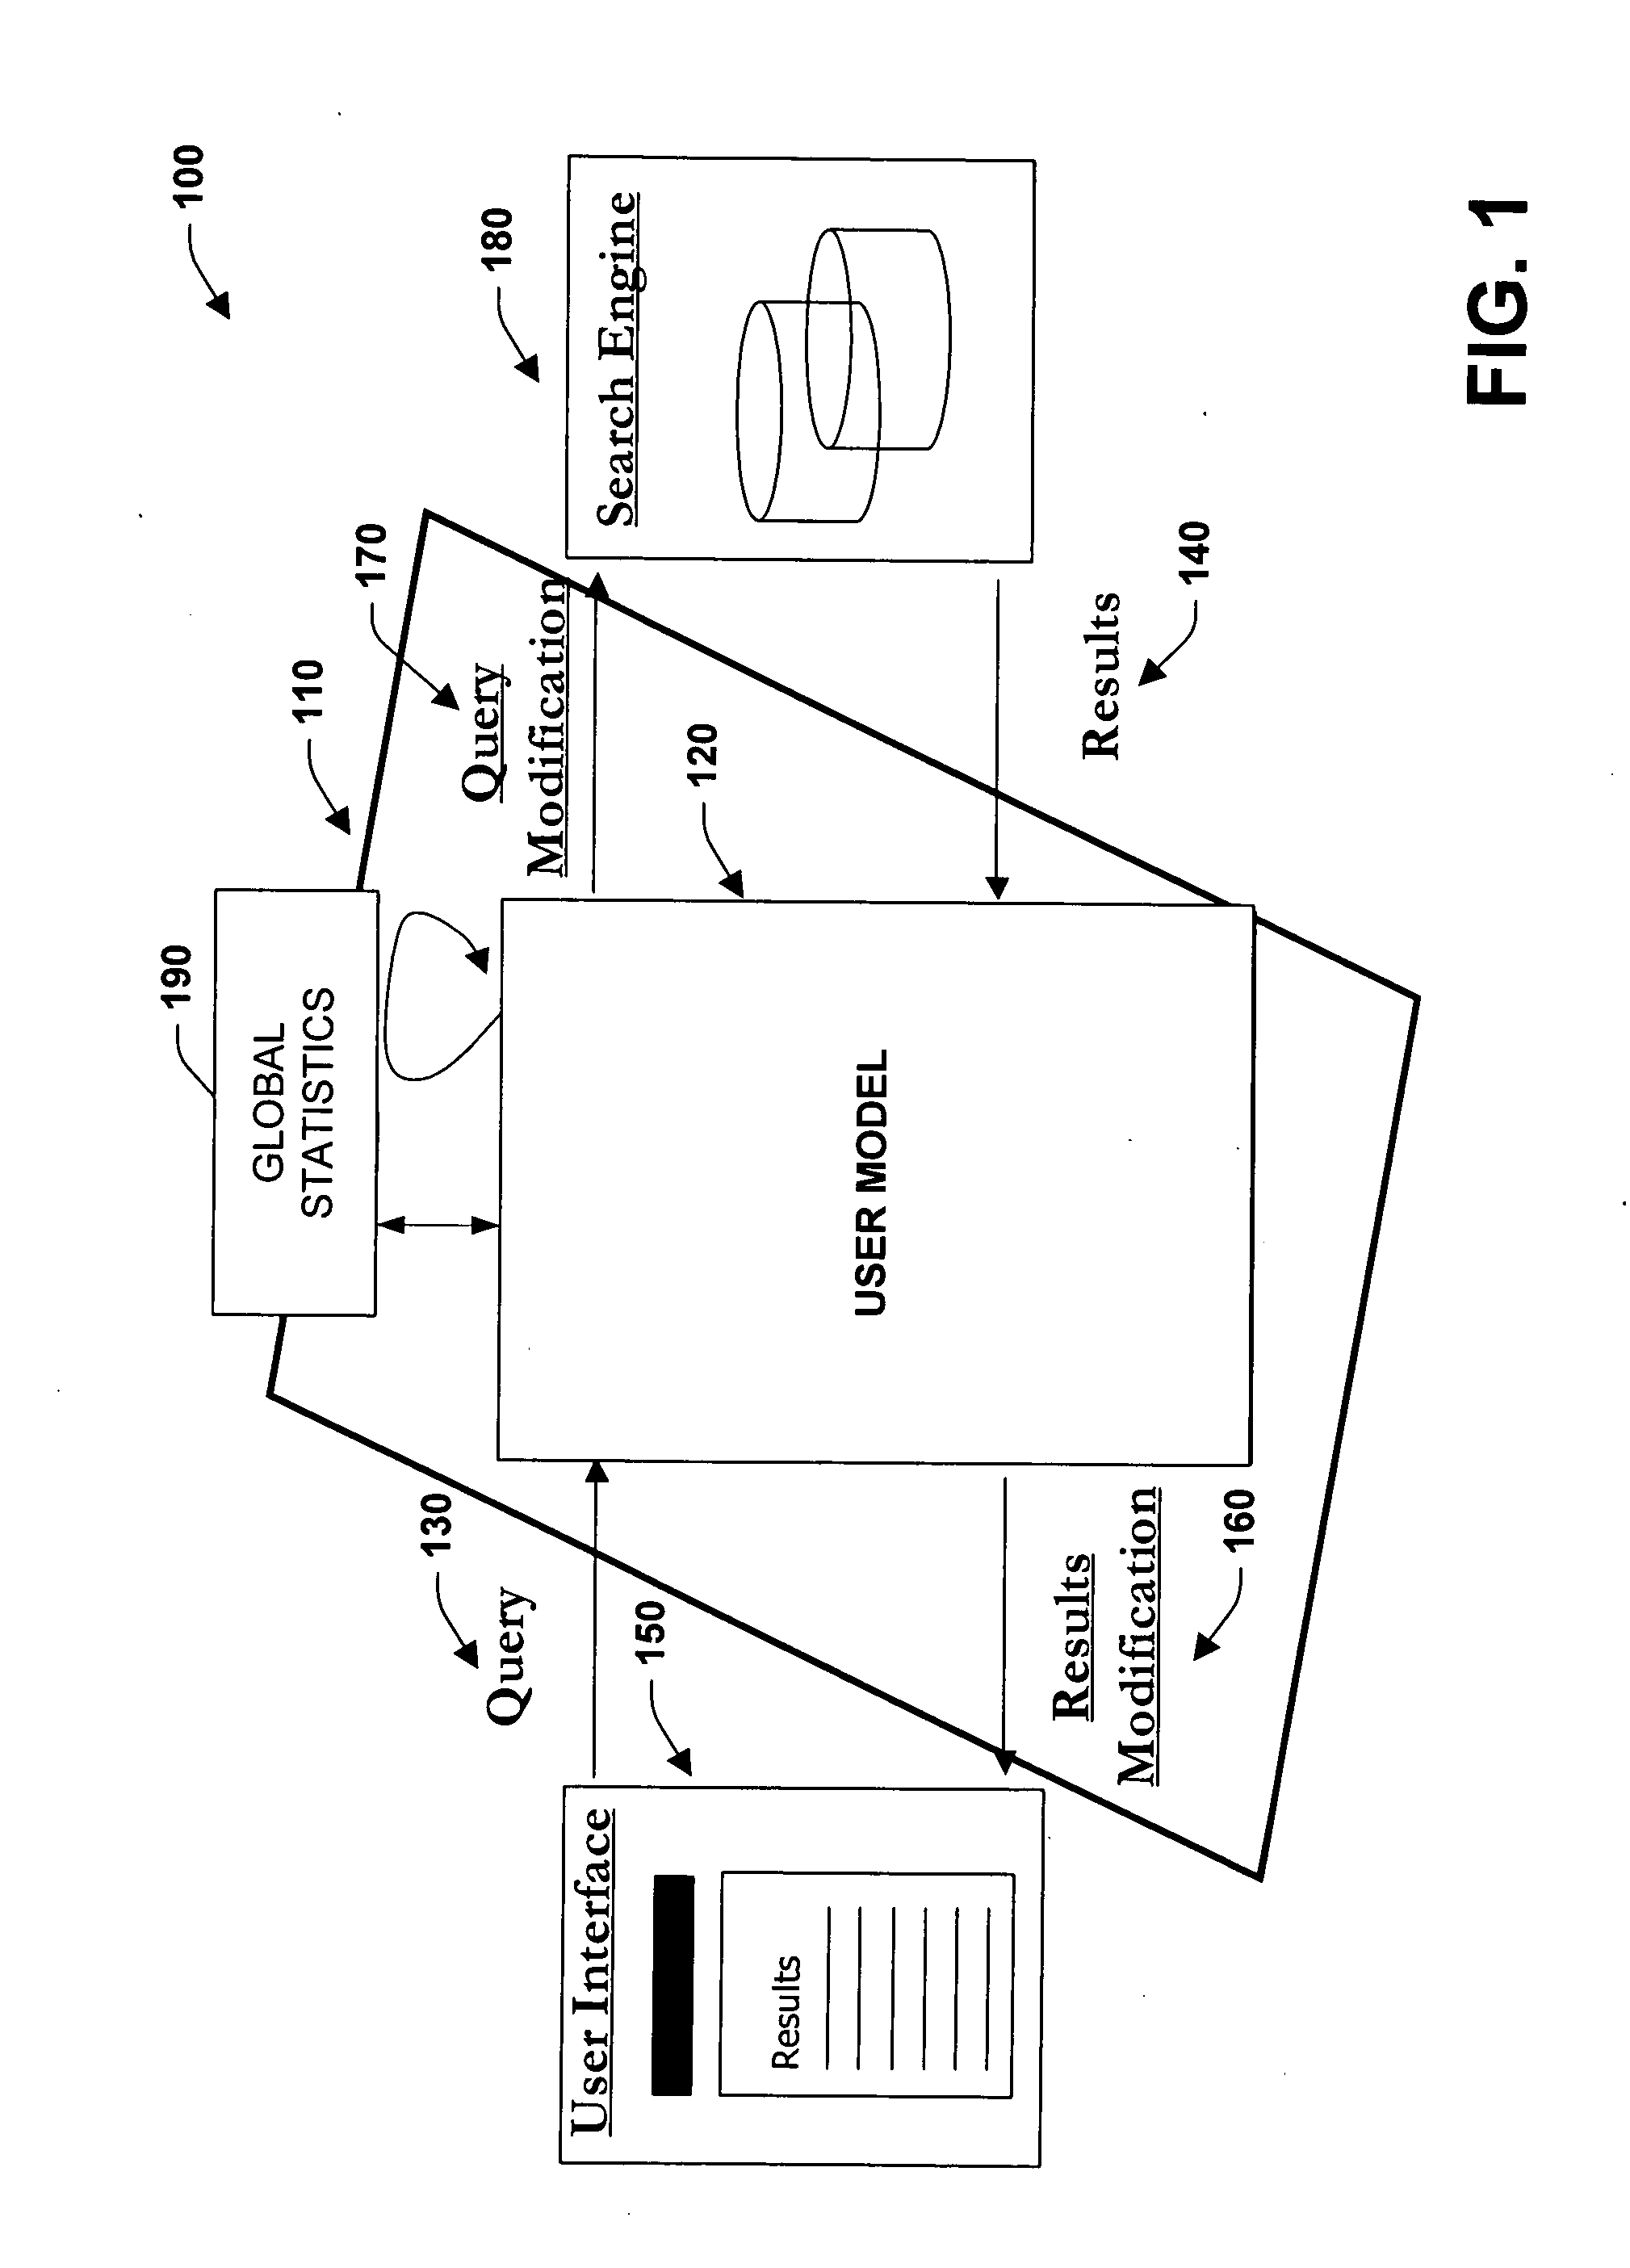 Systems, methods, and interfaces for providing personalized search and information access